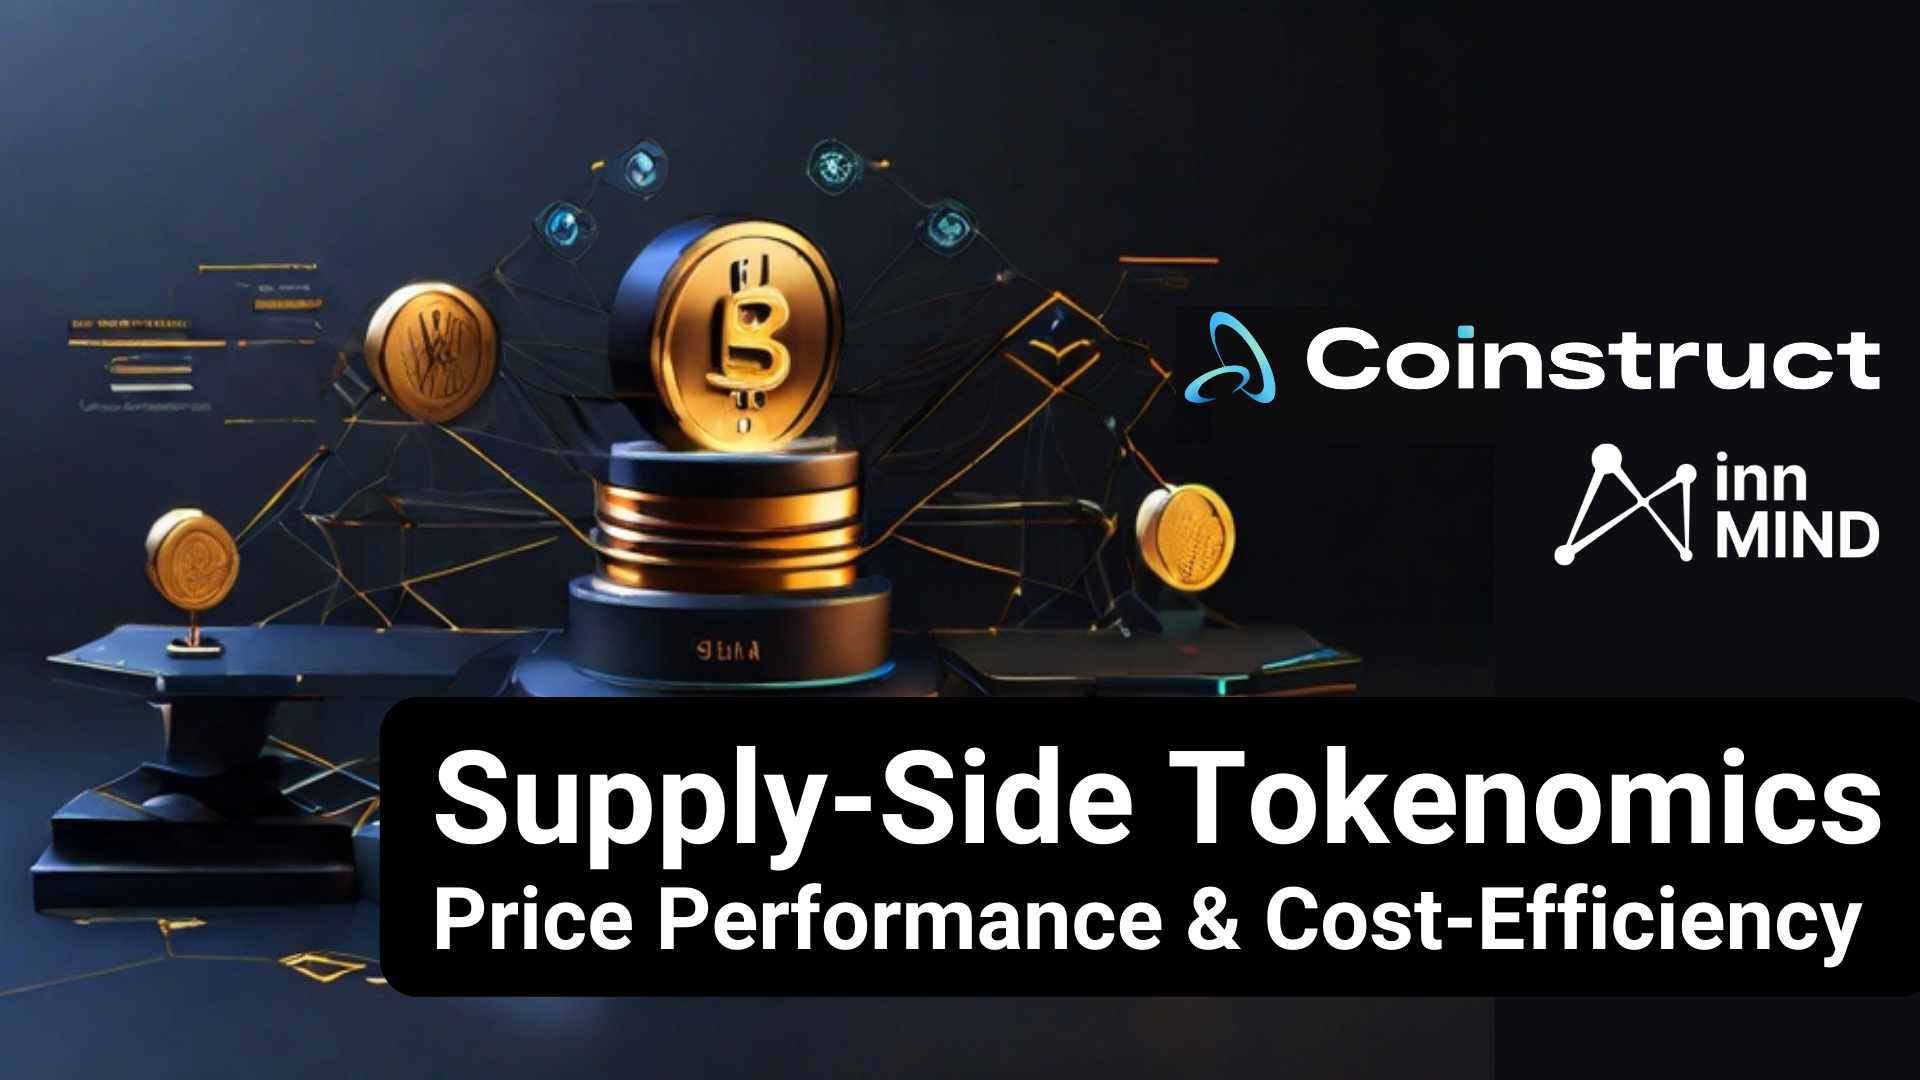 Supply-Side Tokenomics: Supply, Distribution, Optimization for Price Performance & Cost-Efficiency